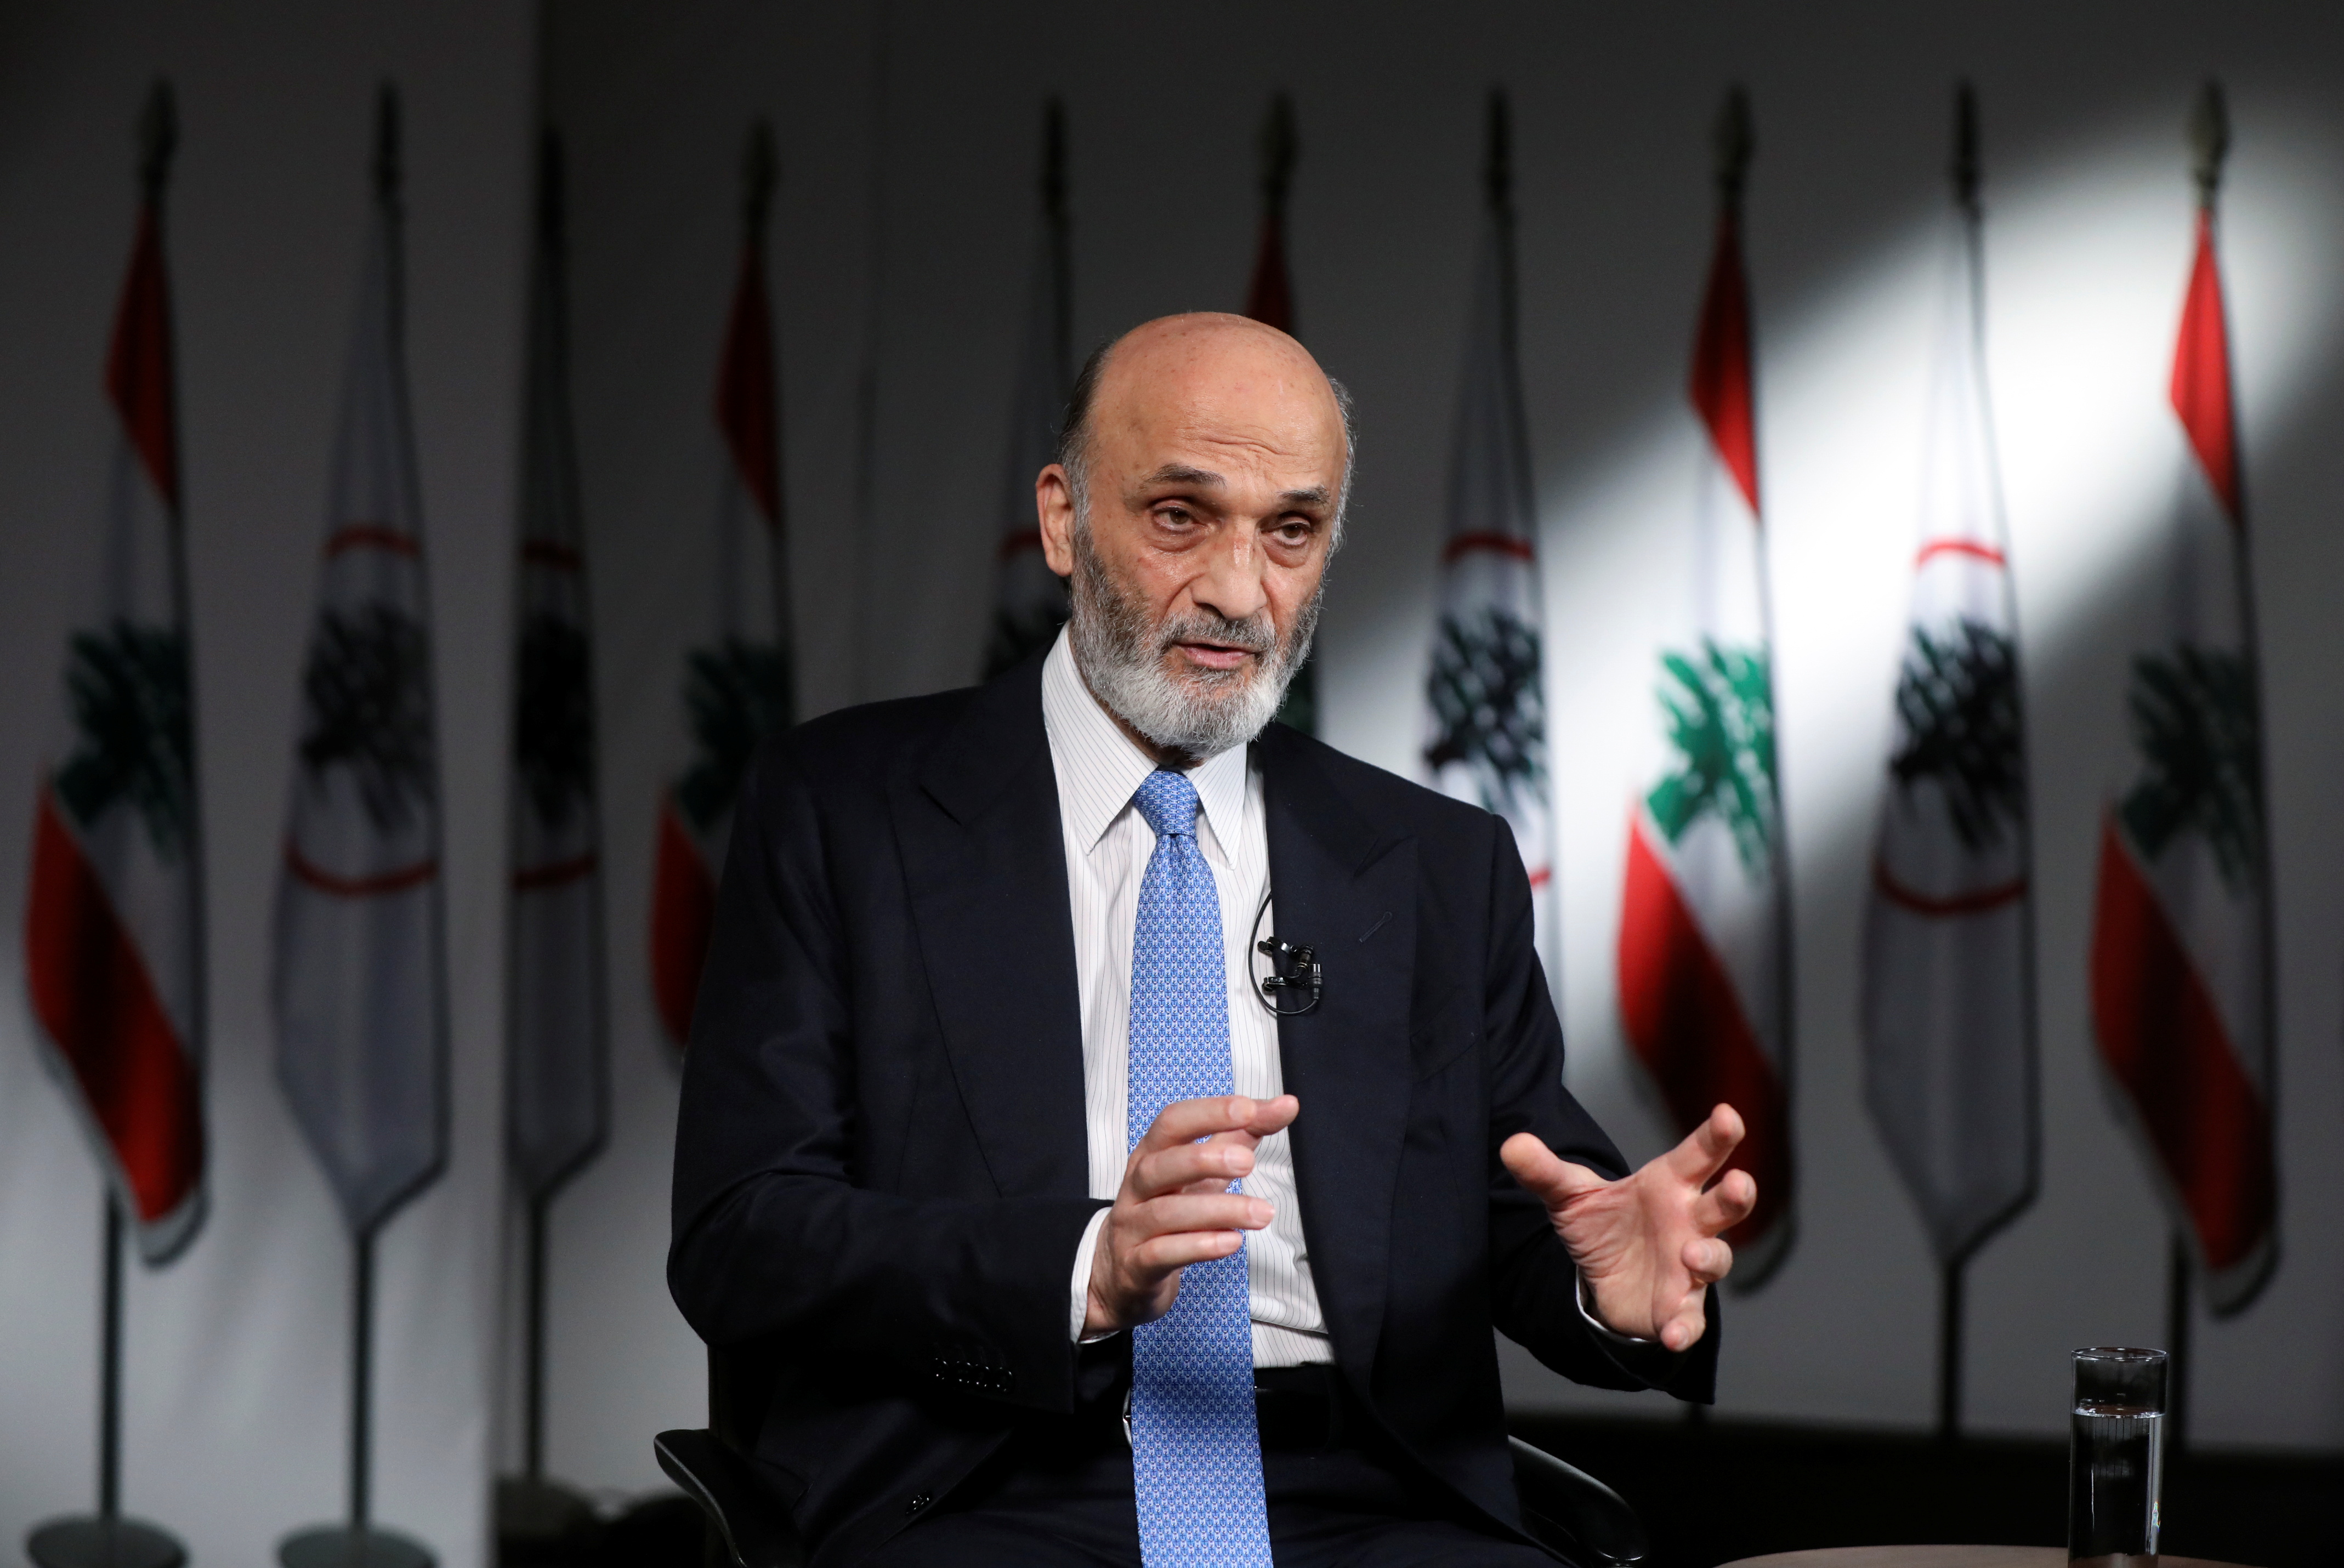 Samir Geagea, the leader of Lebanon's Christian Lebanese Forces (LF) party, speaks during an interview with Reuters at his residence in Maarab, Lebanon November 29, 2021. Picture taken November 29, 2021. REUTERS/Mohamed Azakir